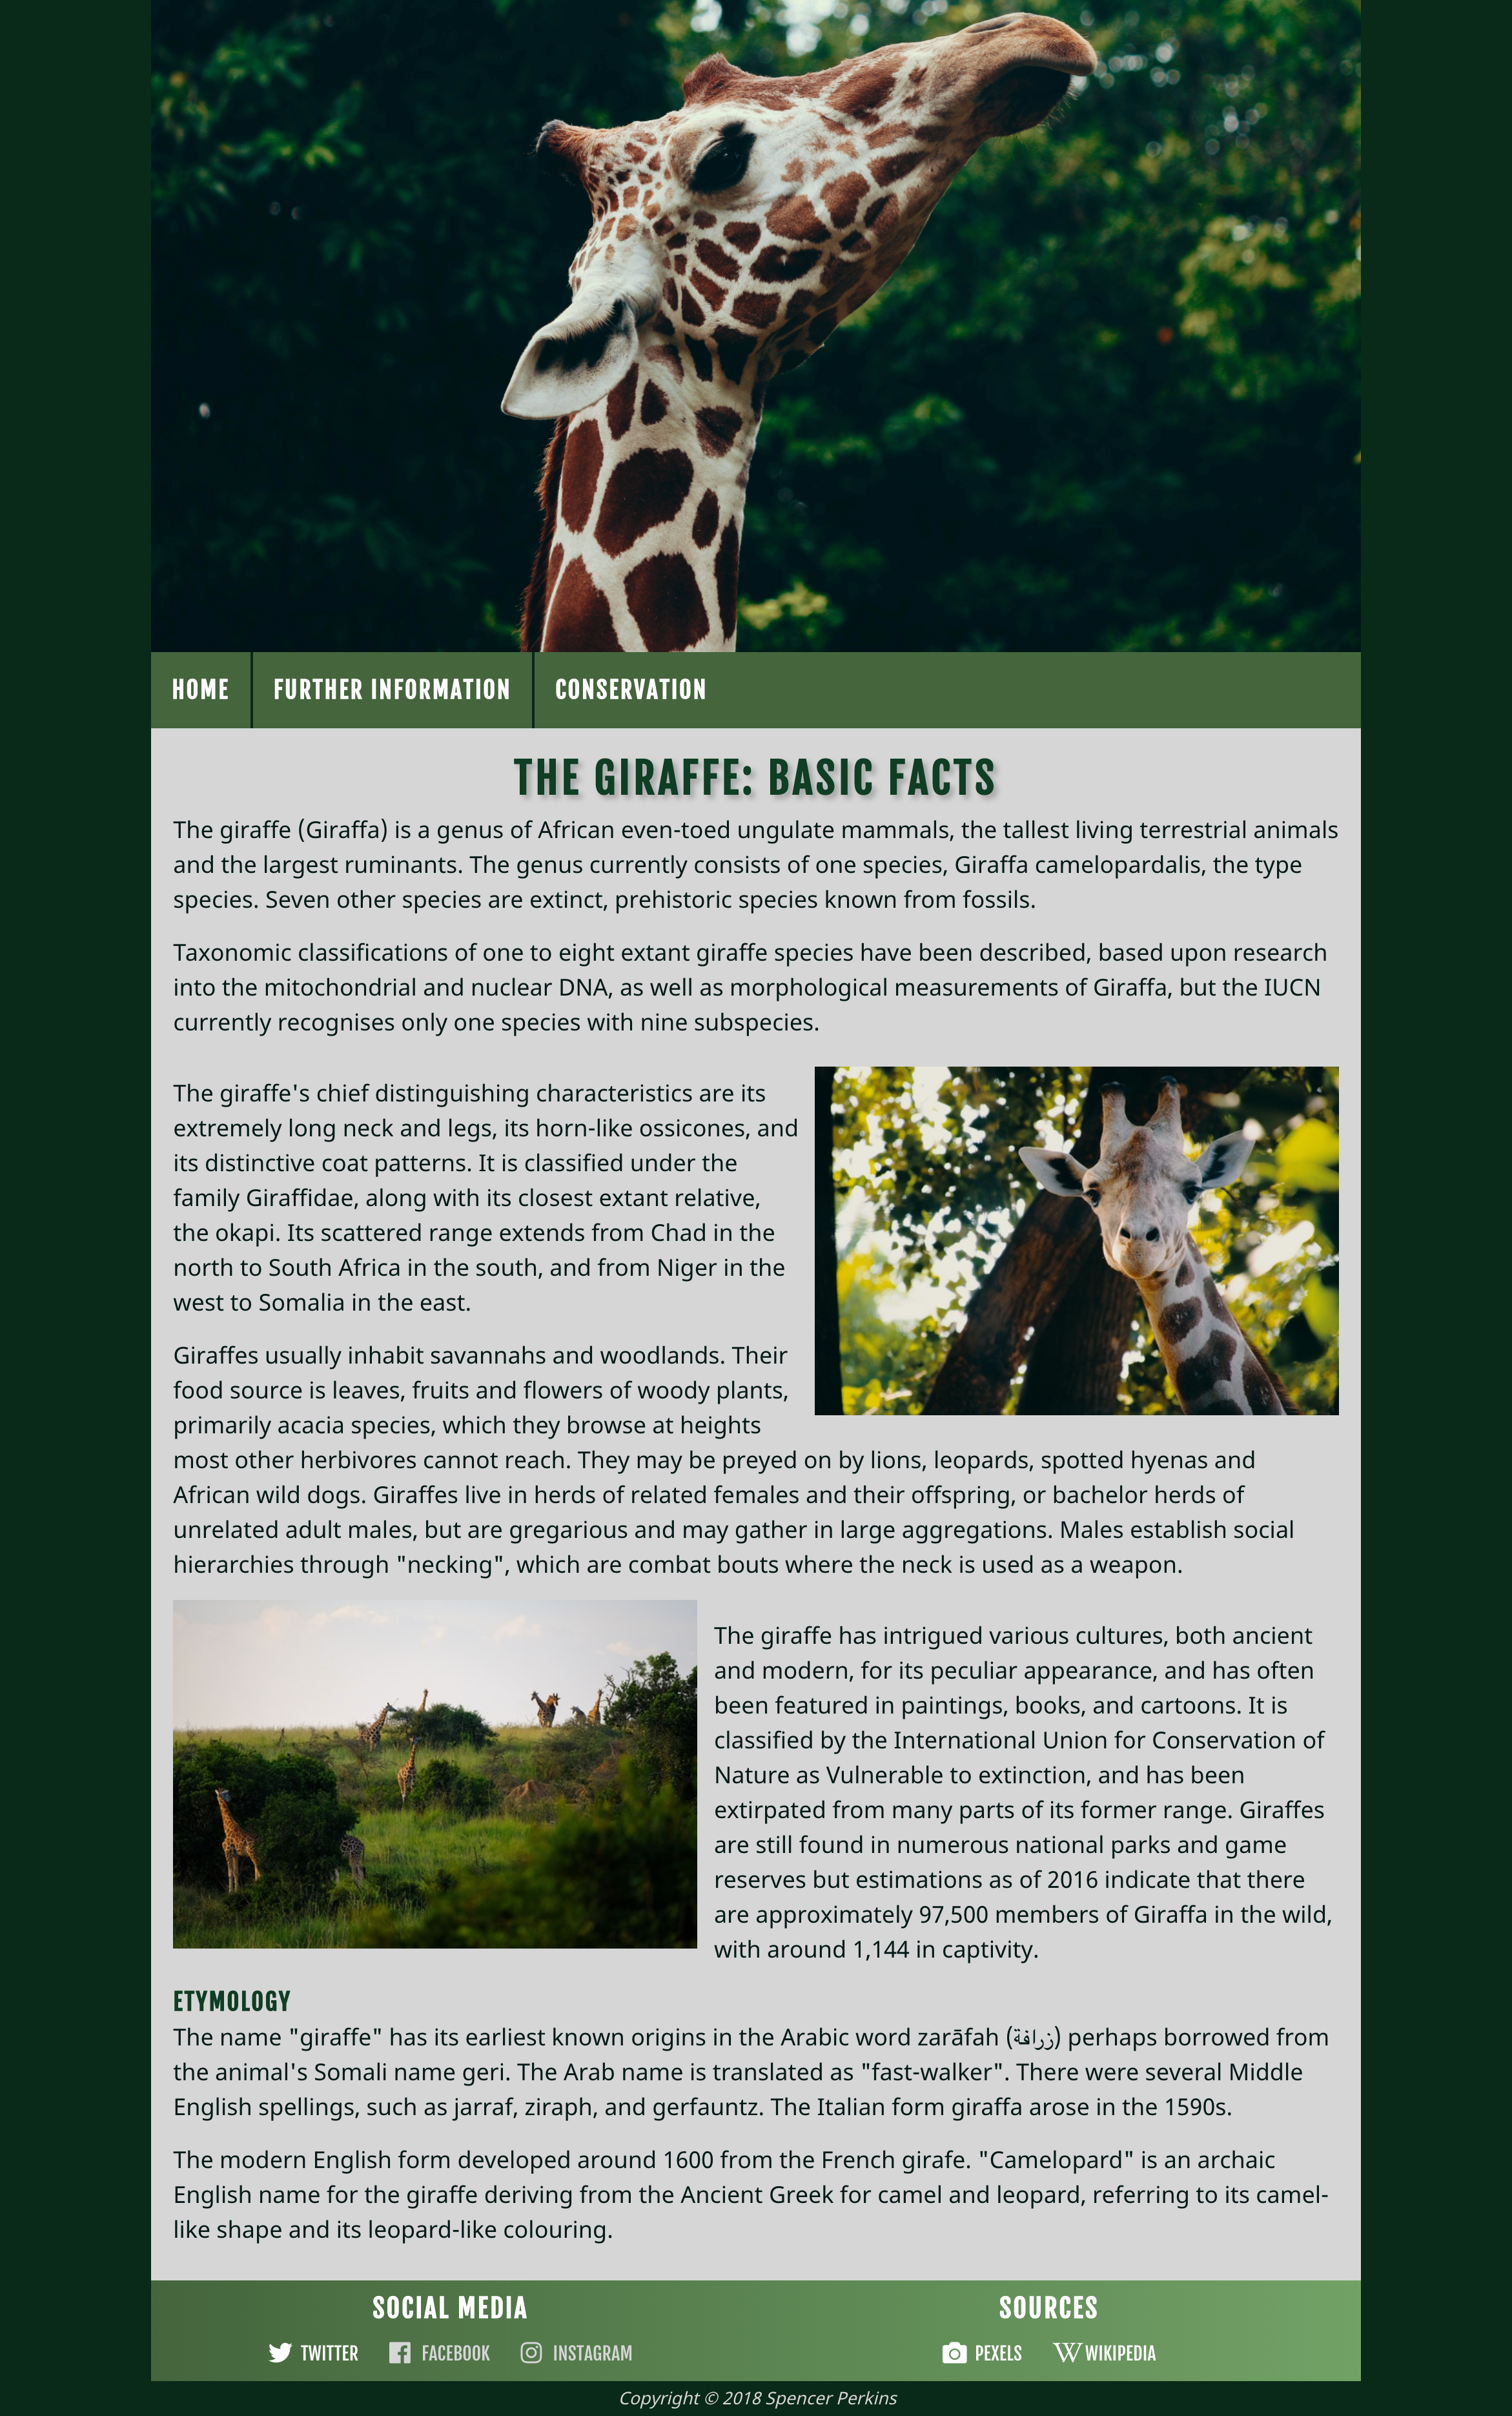 A screencap of a green website with a large header image of a giraffe. The site is filled with Wikipedia's section on giraffes.